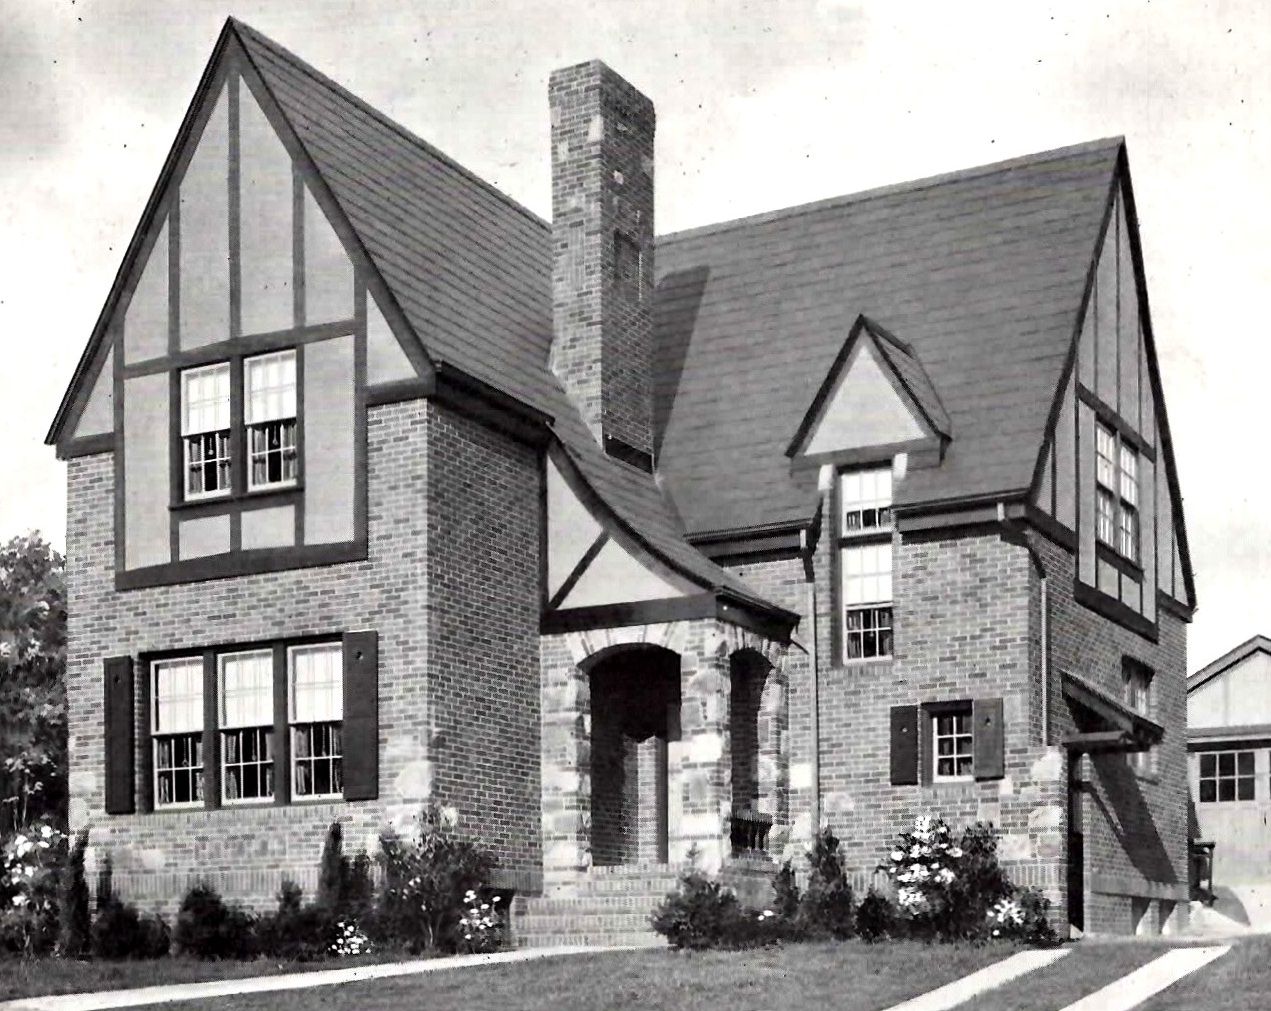 As Rachel points out in her blog, this must have been one of the first Elmhursts built, because it appeared in the 1929 